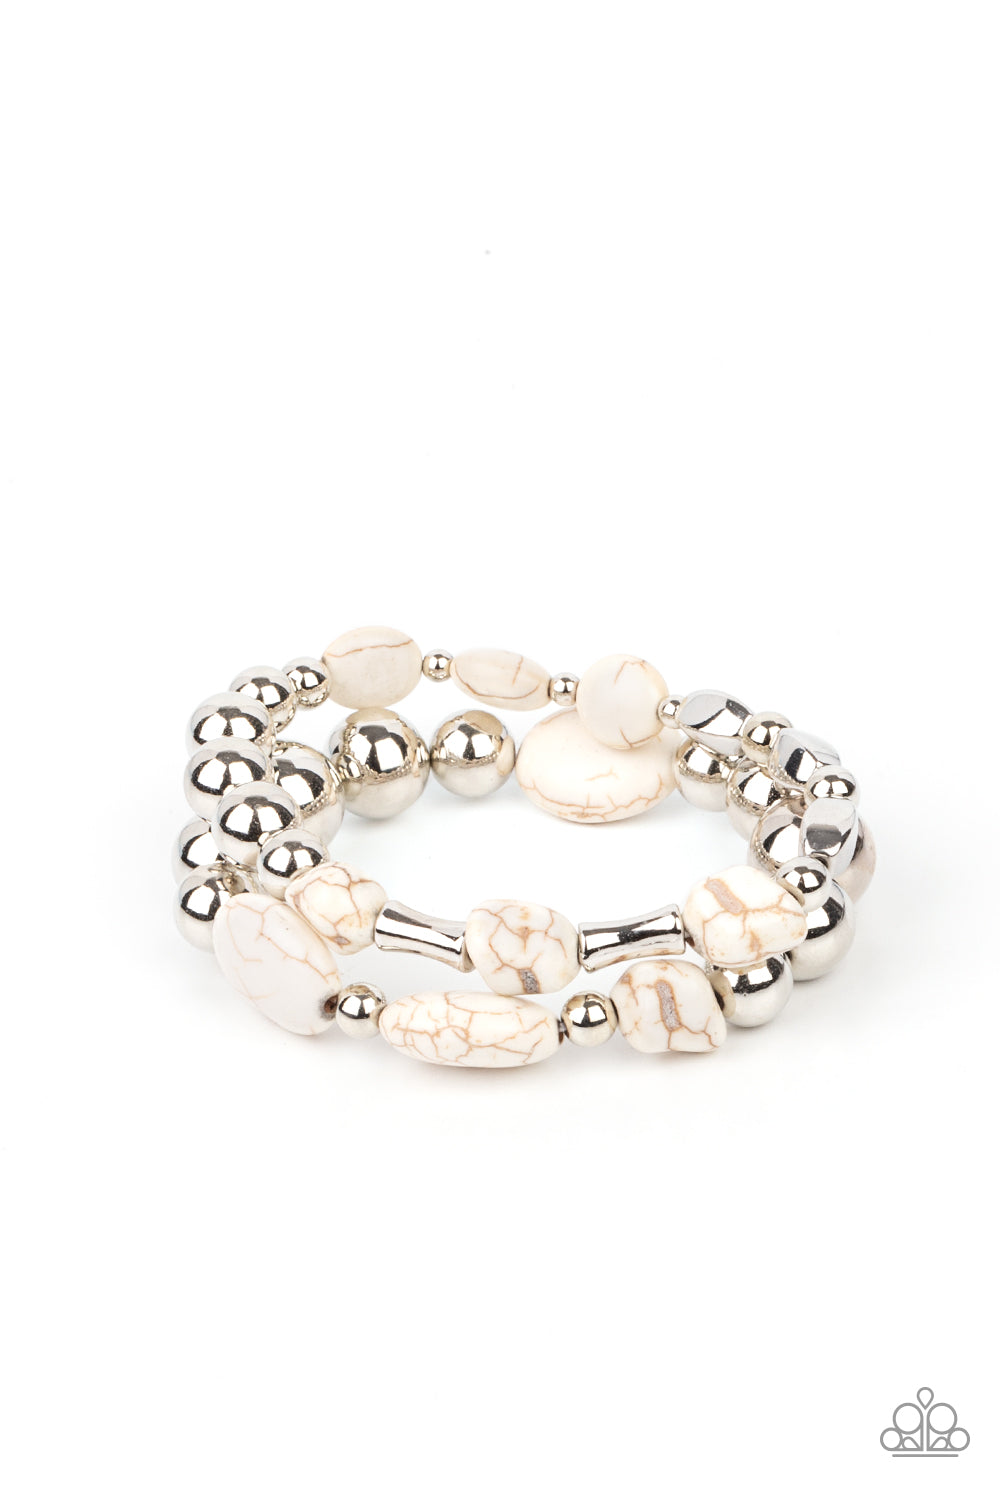 Authentically Artisan White Bracelet - Paparazzi Accessories. Mismatched white stones and oversized silver beads are threaded along stretchy bands around the wrist, creating earthy layers.  All Paparazzi Accessories are lead free and nickel free!  Sold as one pair of bracelets.